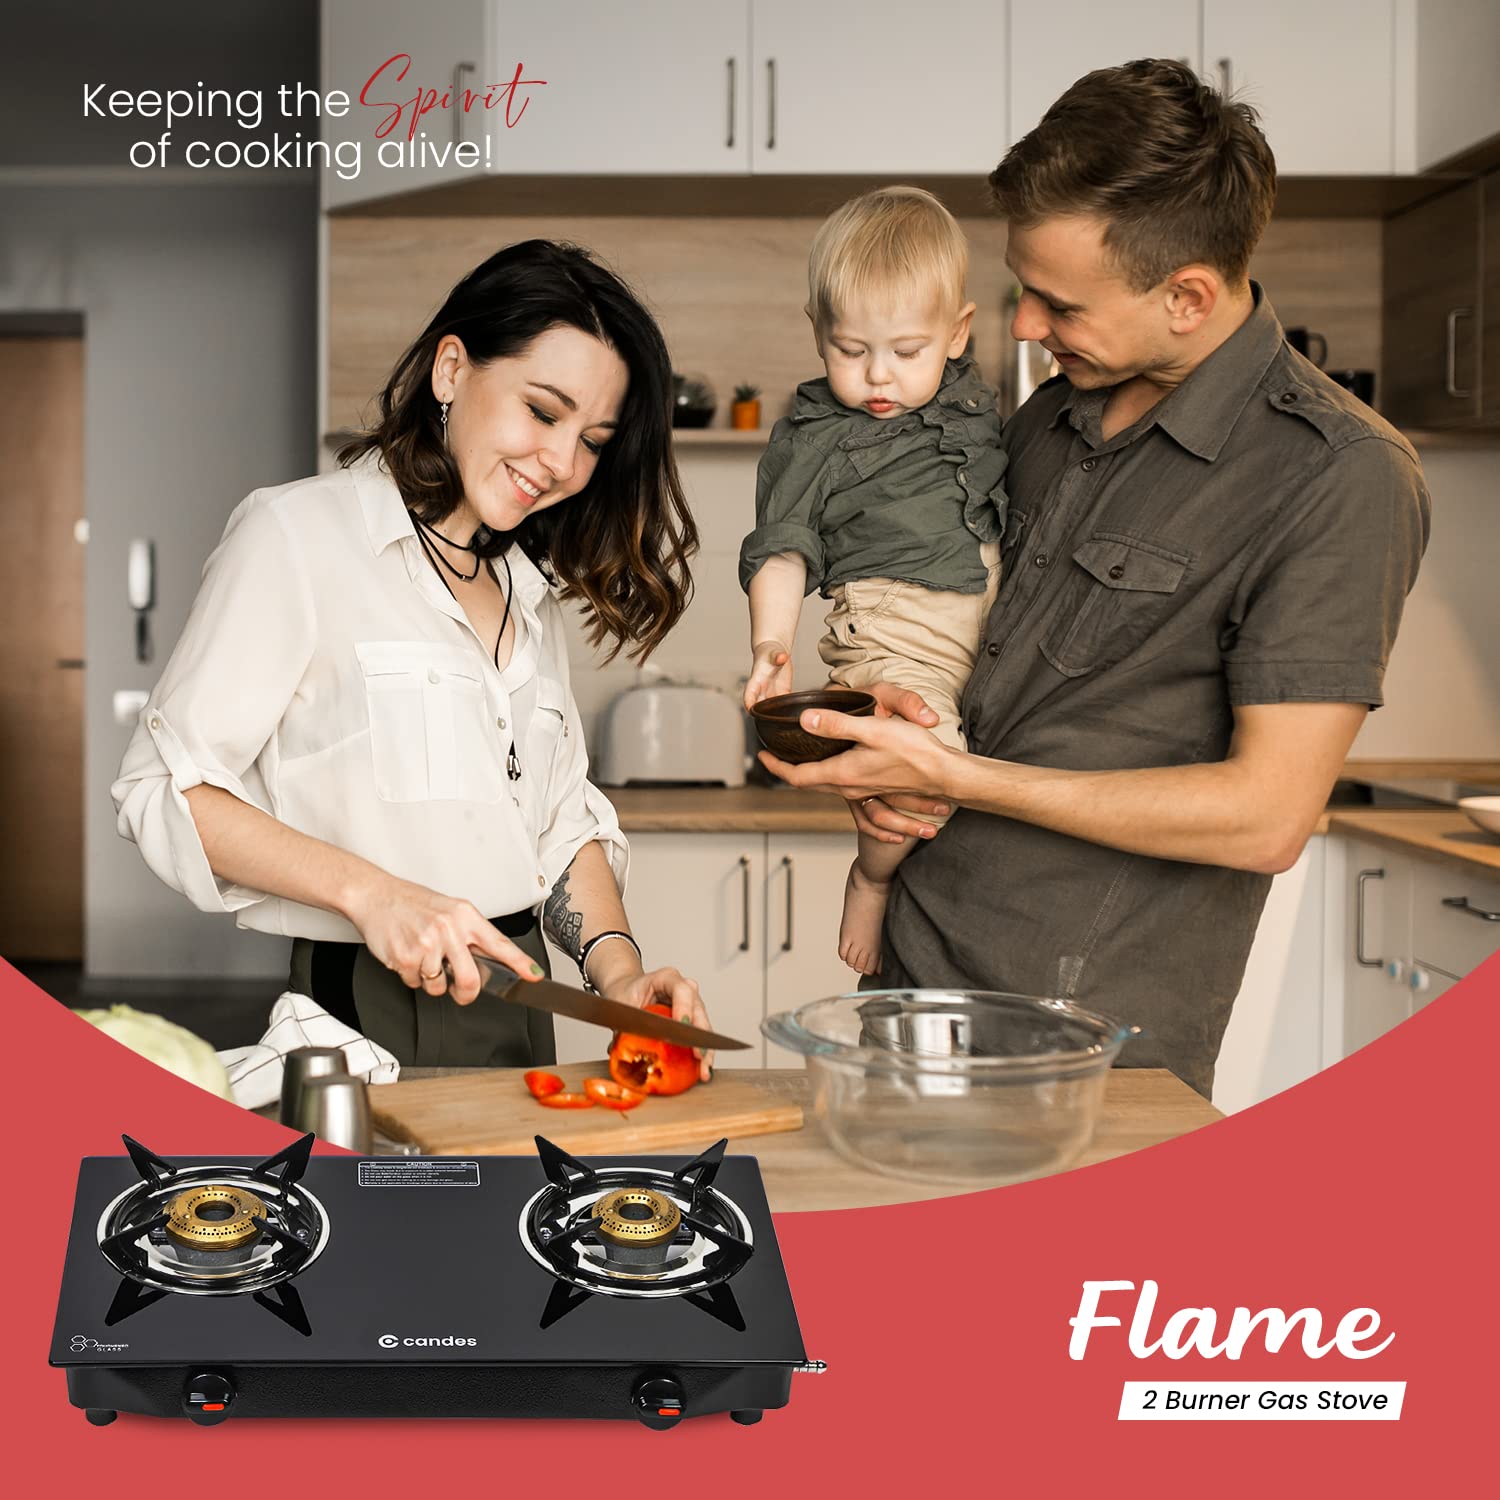 Candes Flame Glass Top Gas Stove | Manual Ignition, Black (ISI Certified | With 12 Months Warranty (2 Burner)